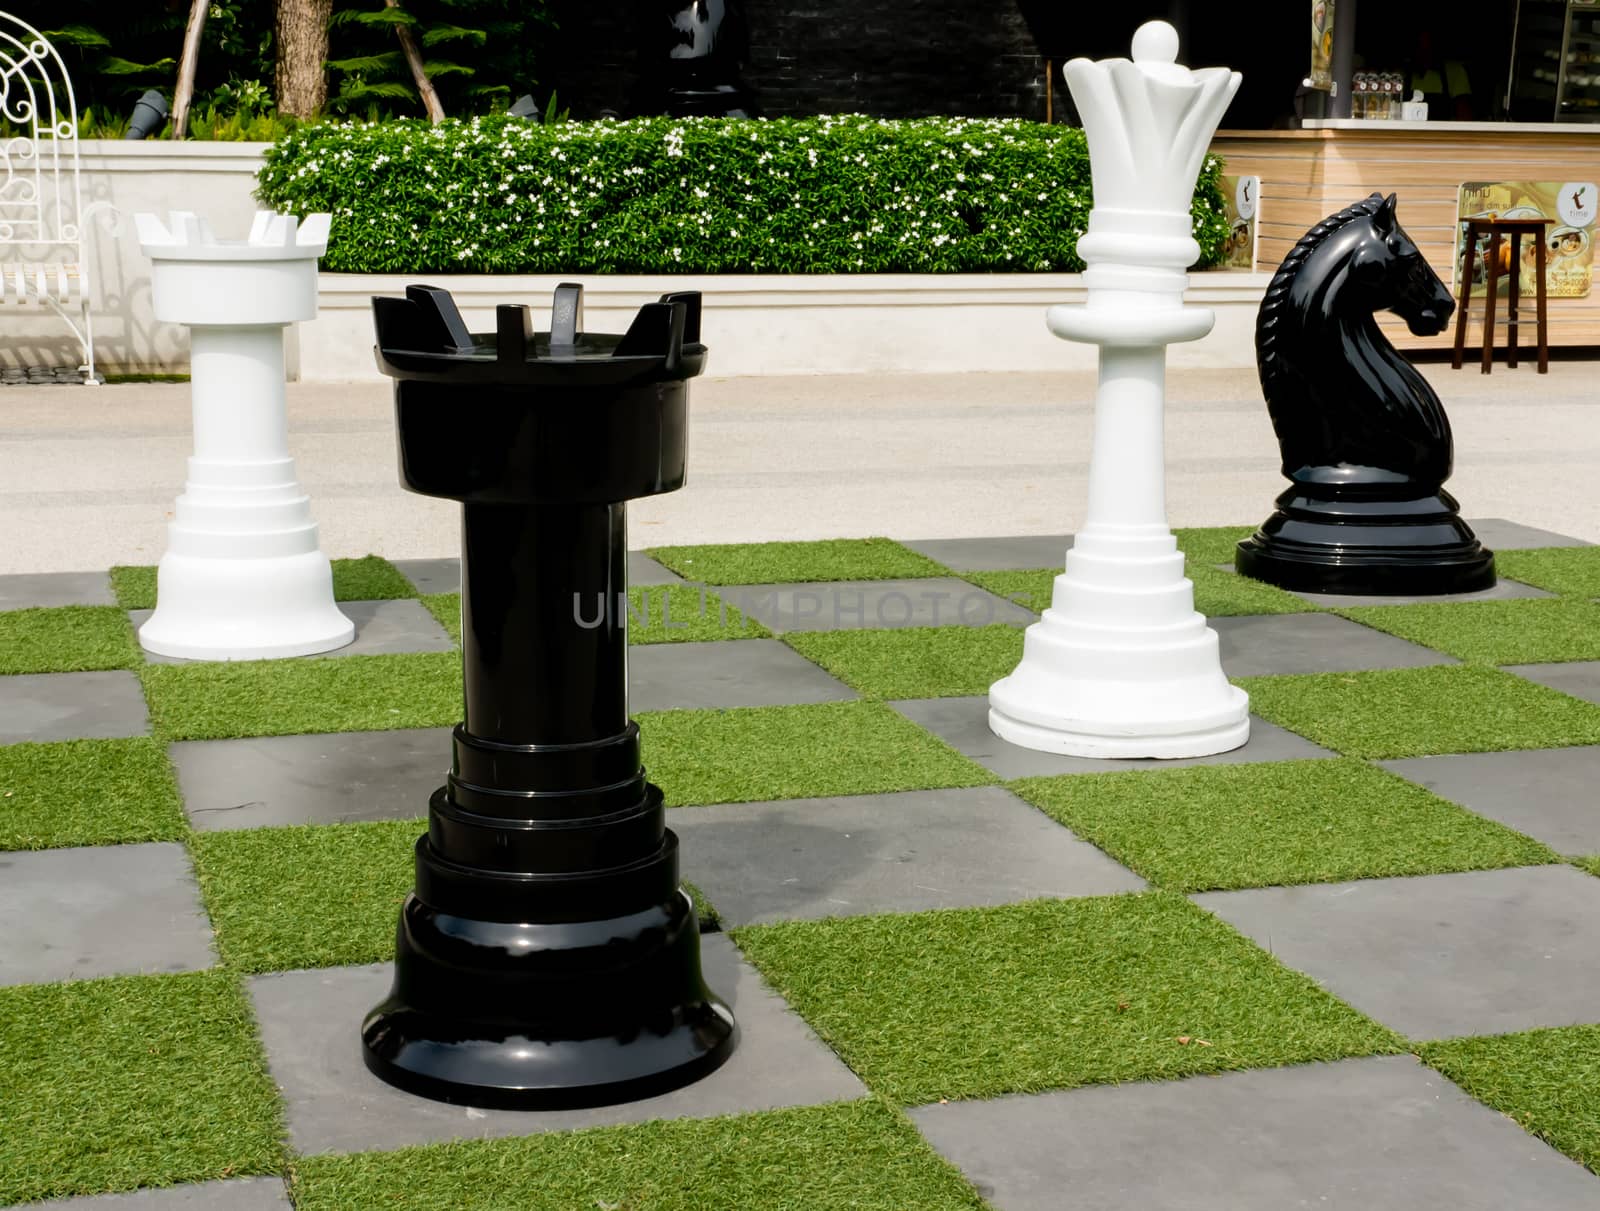 Outdoor chess on the garden by golengstock